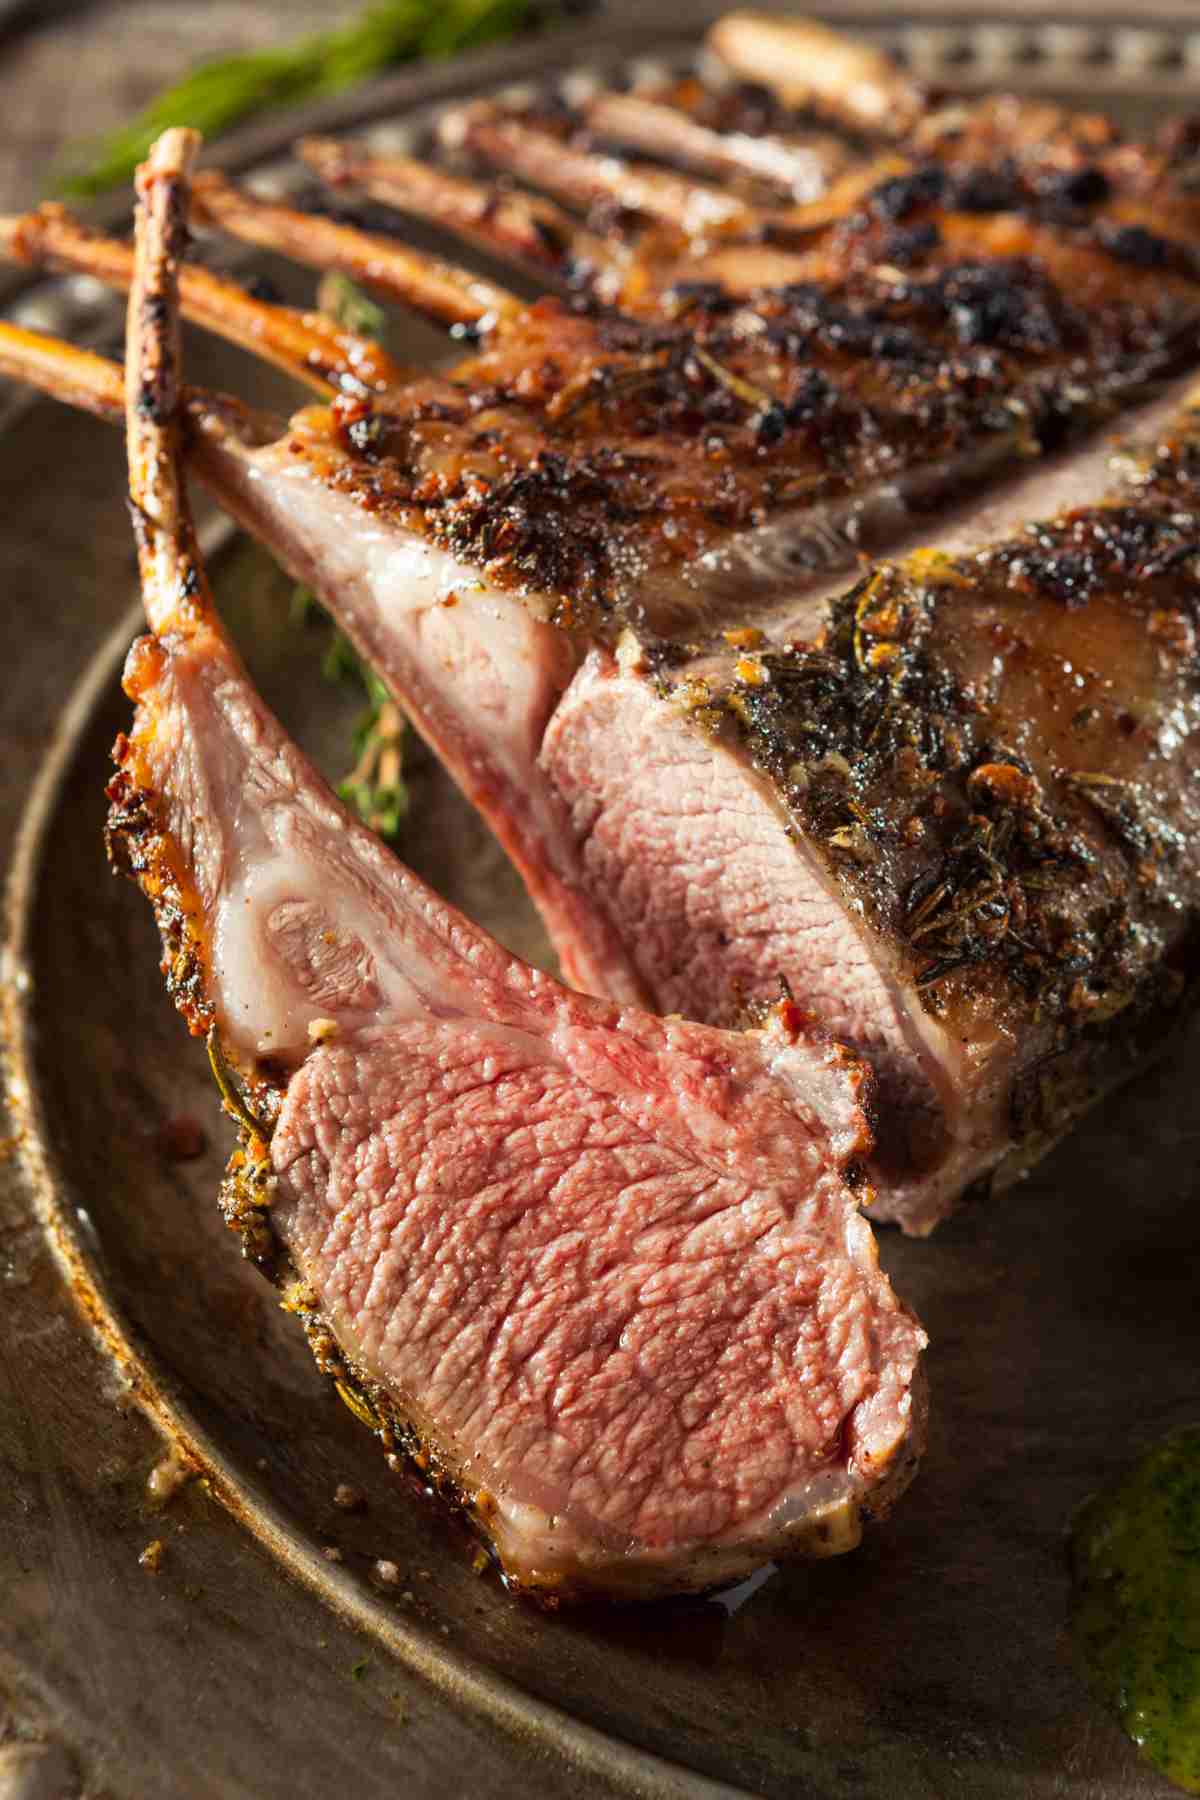 The best lamb internal temperature will give you tender and juicy meat while also ensuring food safety. We’ve got you covered with tips and tricks including how to get an accurate lamb internal temp reading.